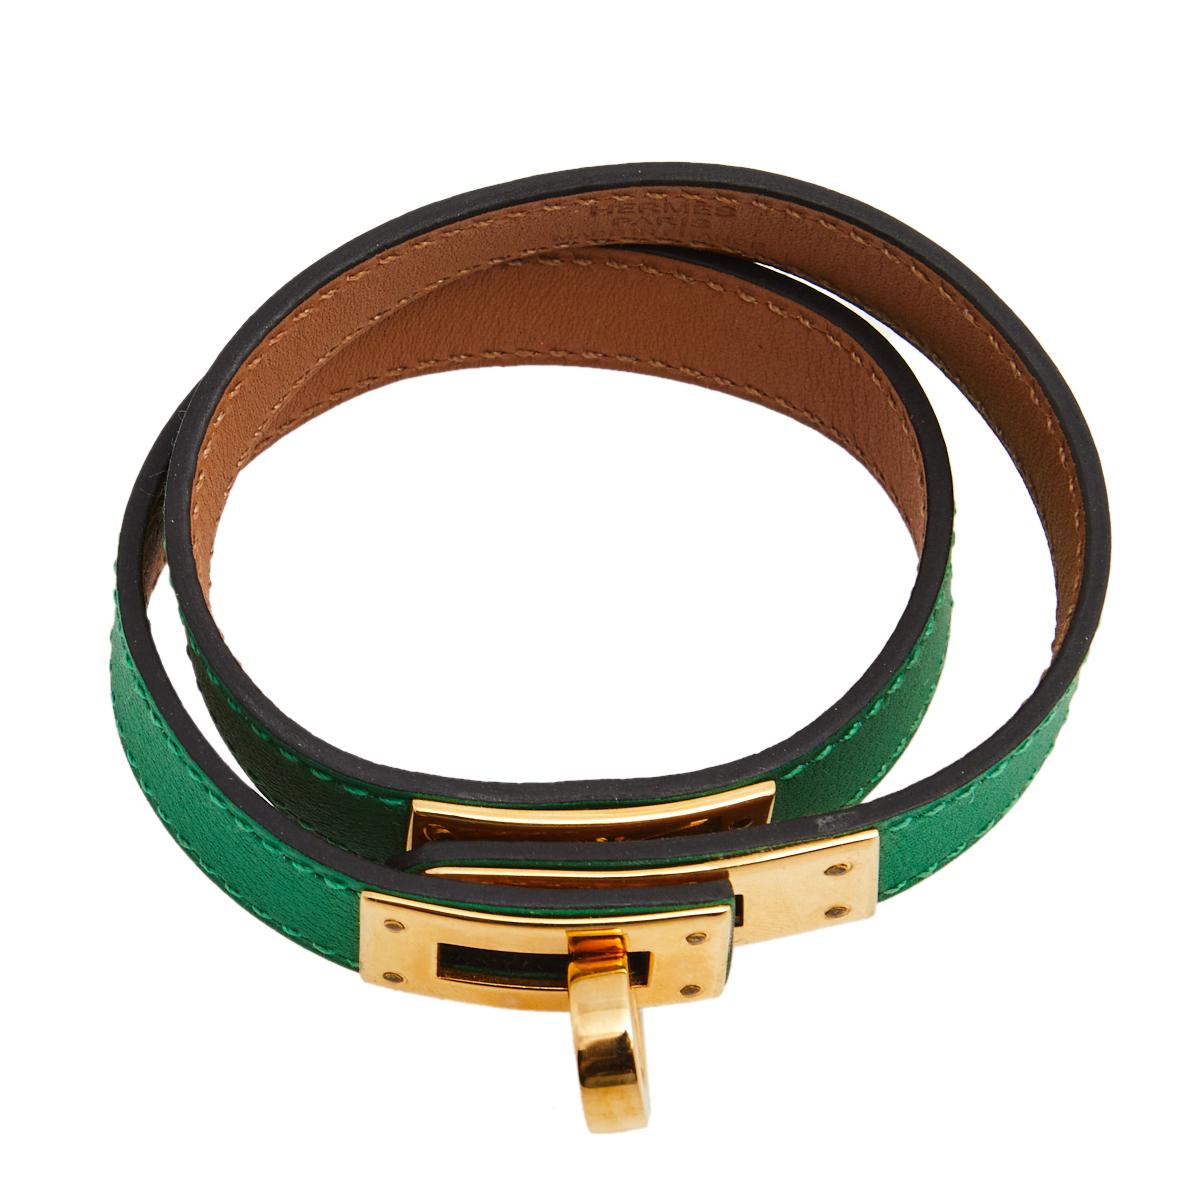 This Hermés Double Tour wrap bracelet is a chic accessory that can be paired with everything, from casuals to evening outfits. Made from leather, it is beautified with a Kelly twist closure in gold-plated metal. The bracelet has a long strap that